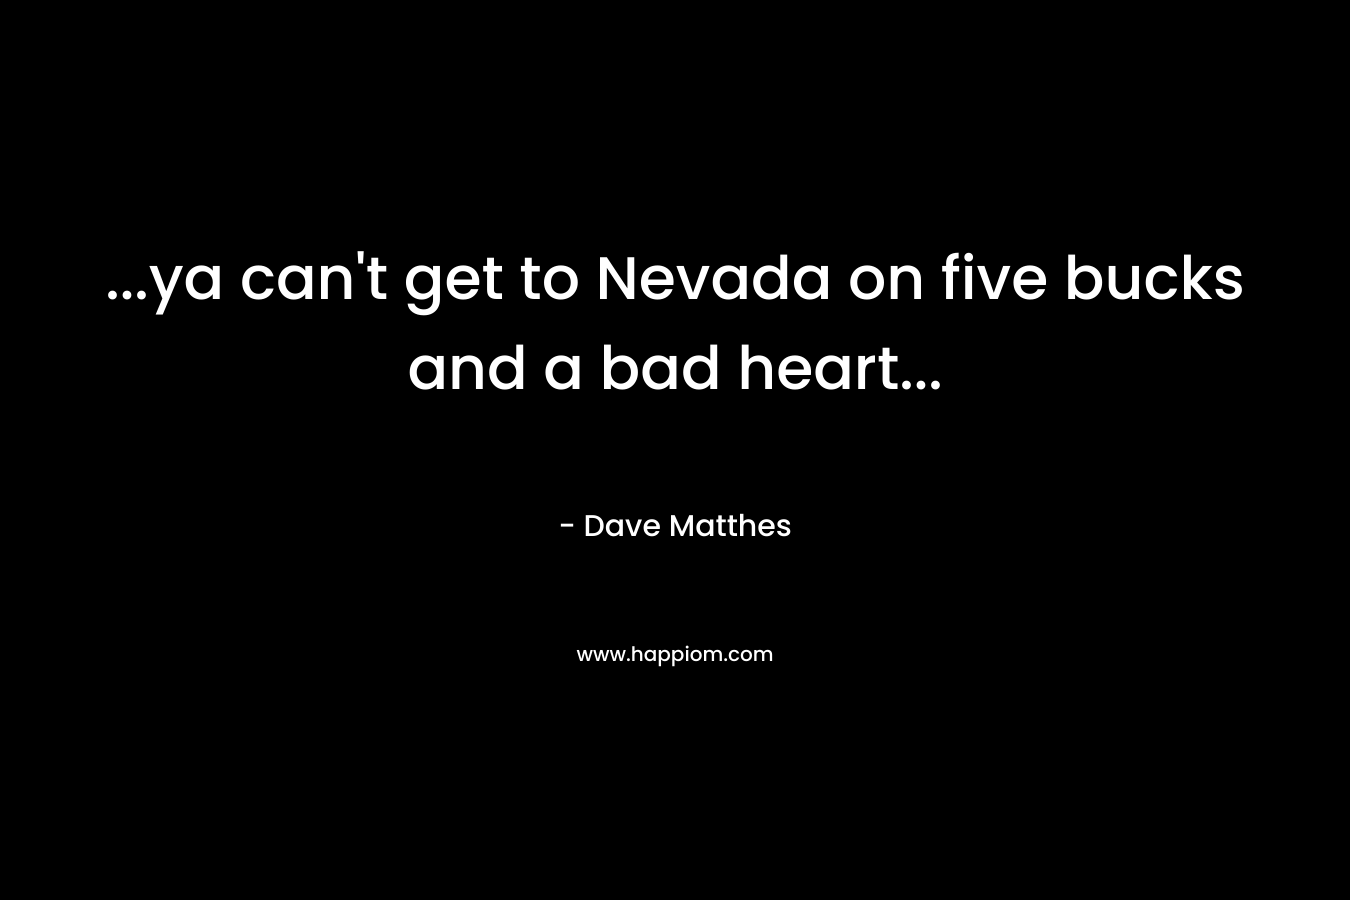 ...ya can't get to Nevada on five bucks and a bad heart...